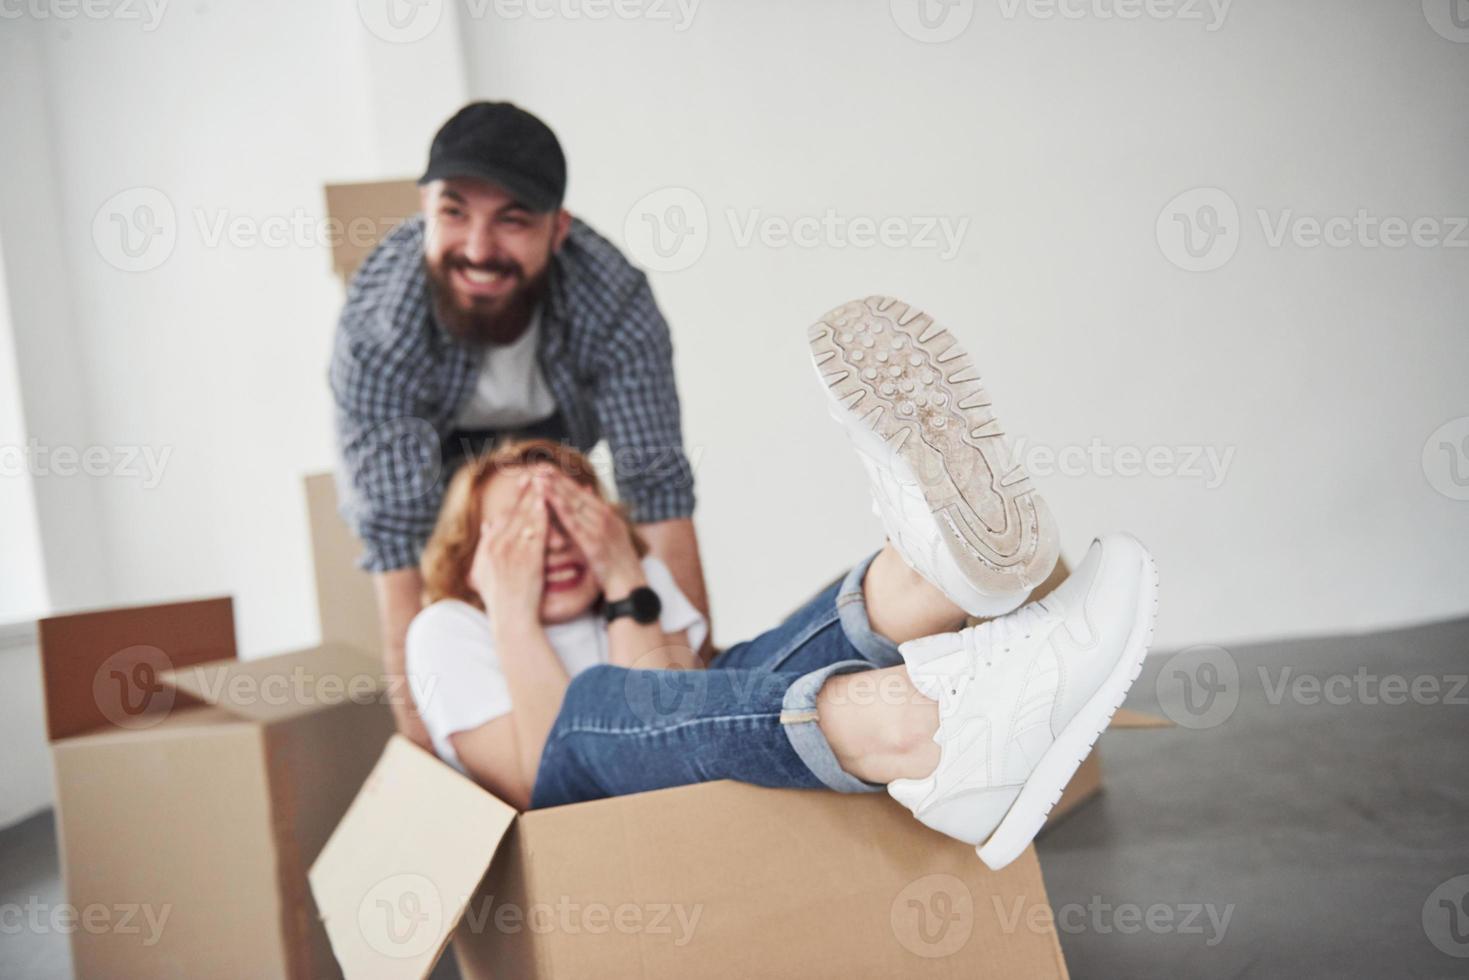 Covering eyes. Happy couple together in their new house. Conception of moving photo